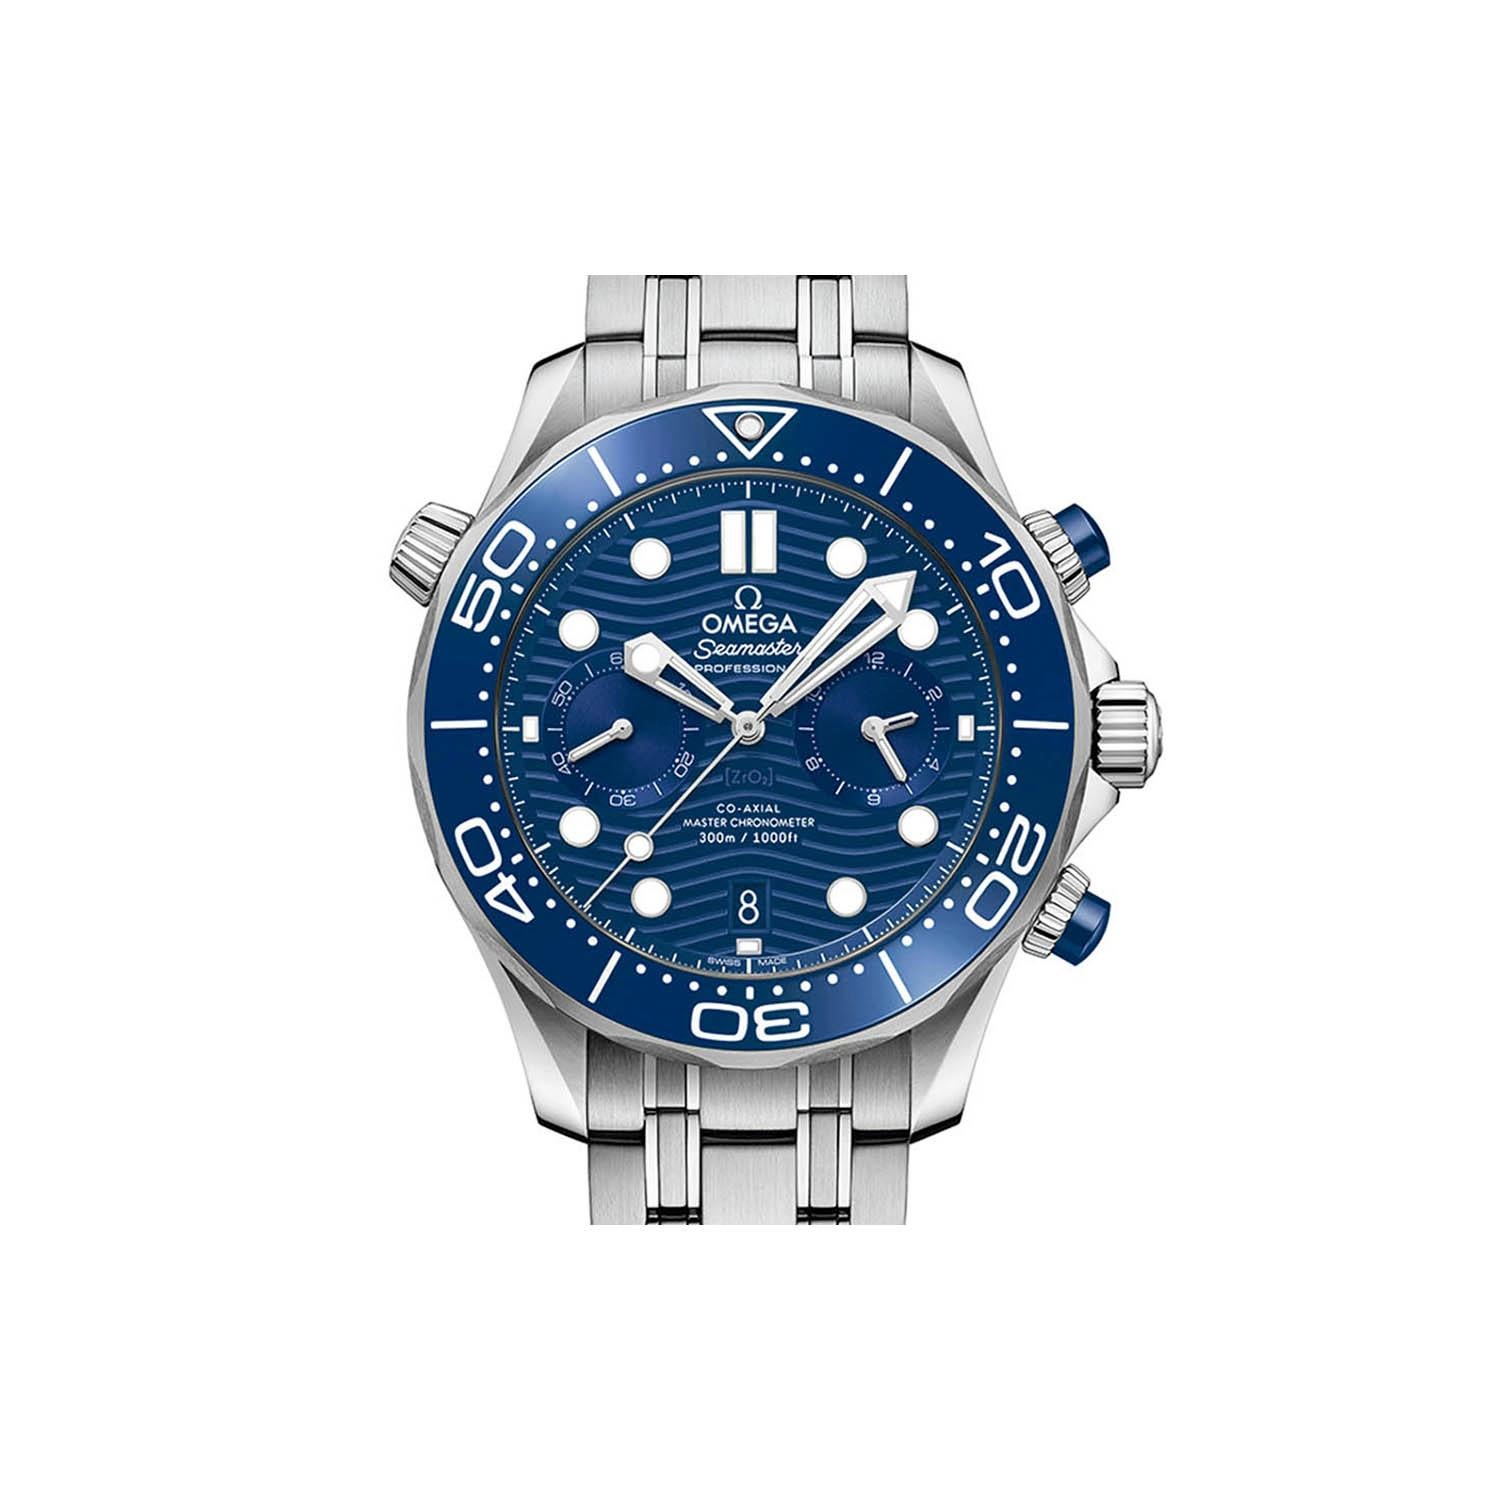 This brand new Omega Seamaster  210.30.44.51.03.001 is a beautiful men's timepiece that is powered by mechanical (automatic) movement which is cased in a stainless steel case. It has a round shape face, chronograph, date indicator, small seconds